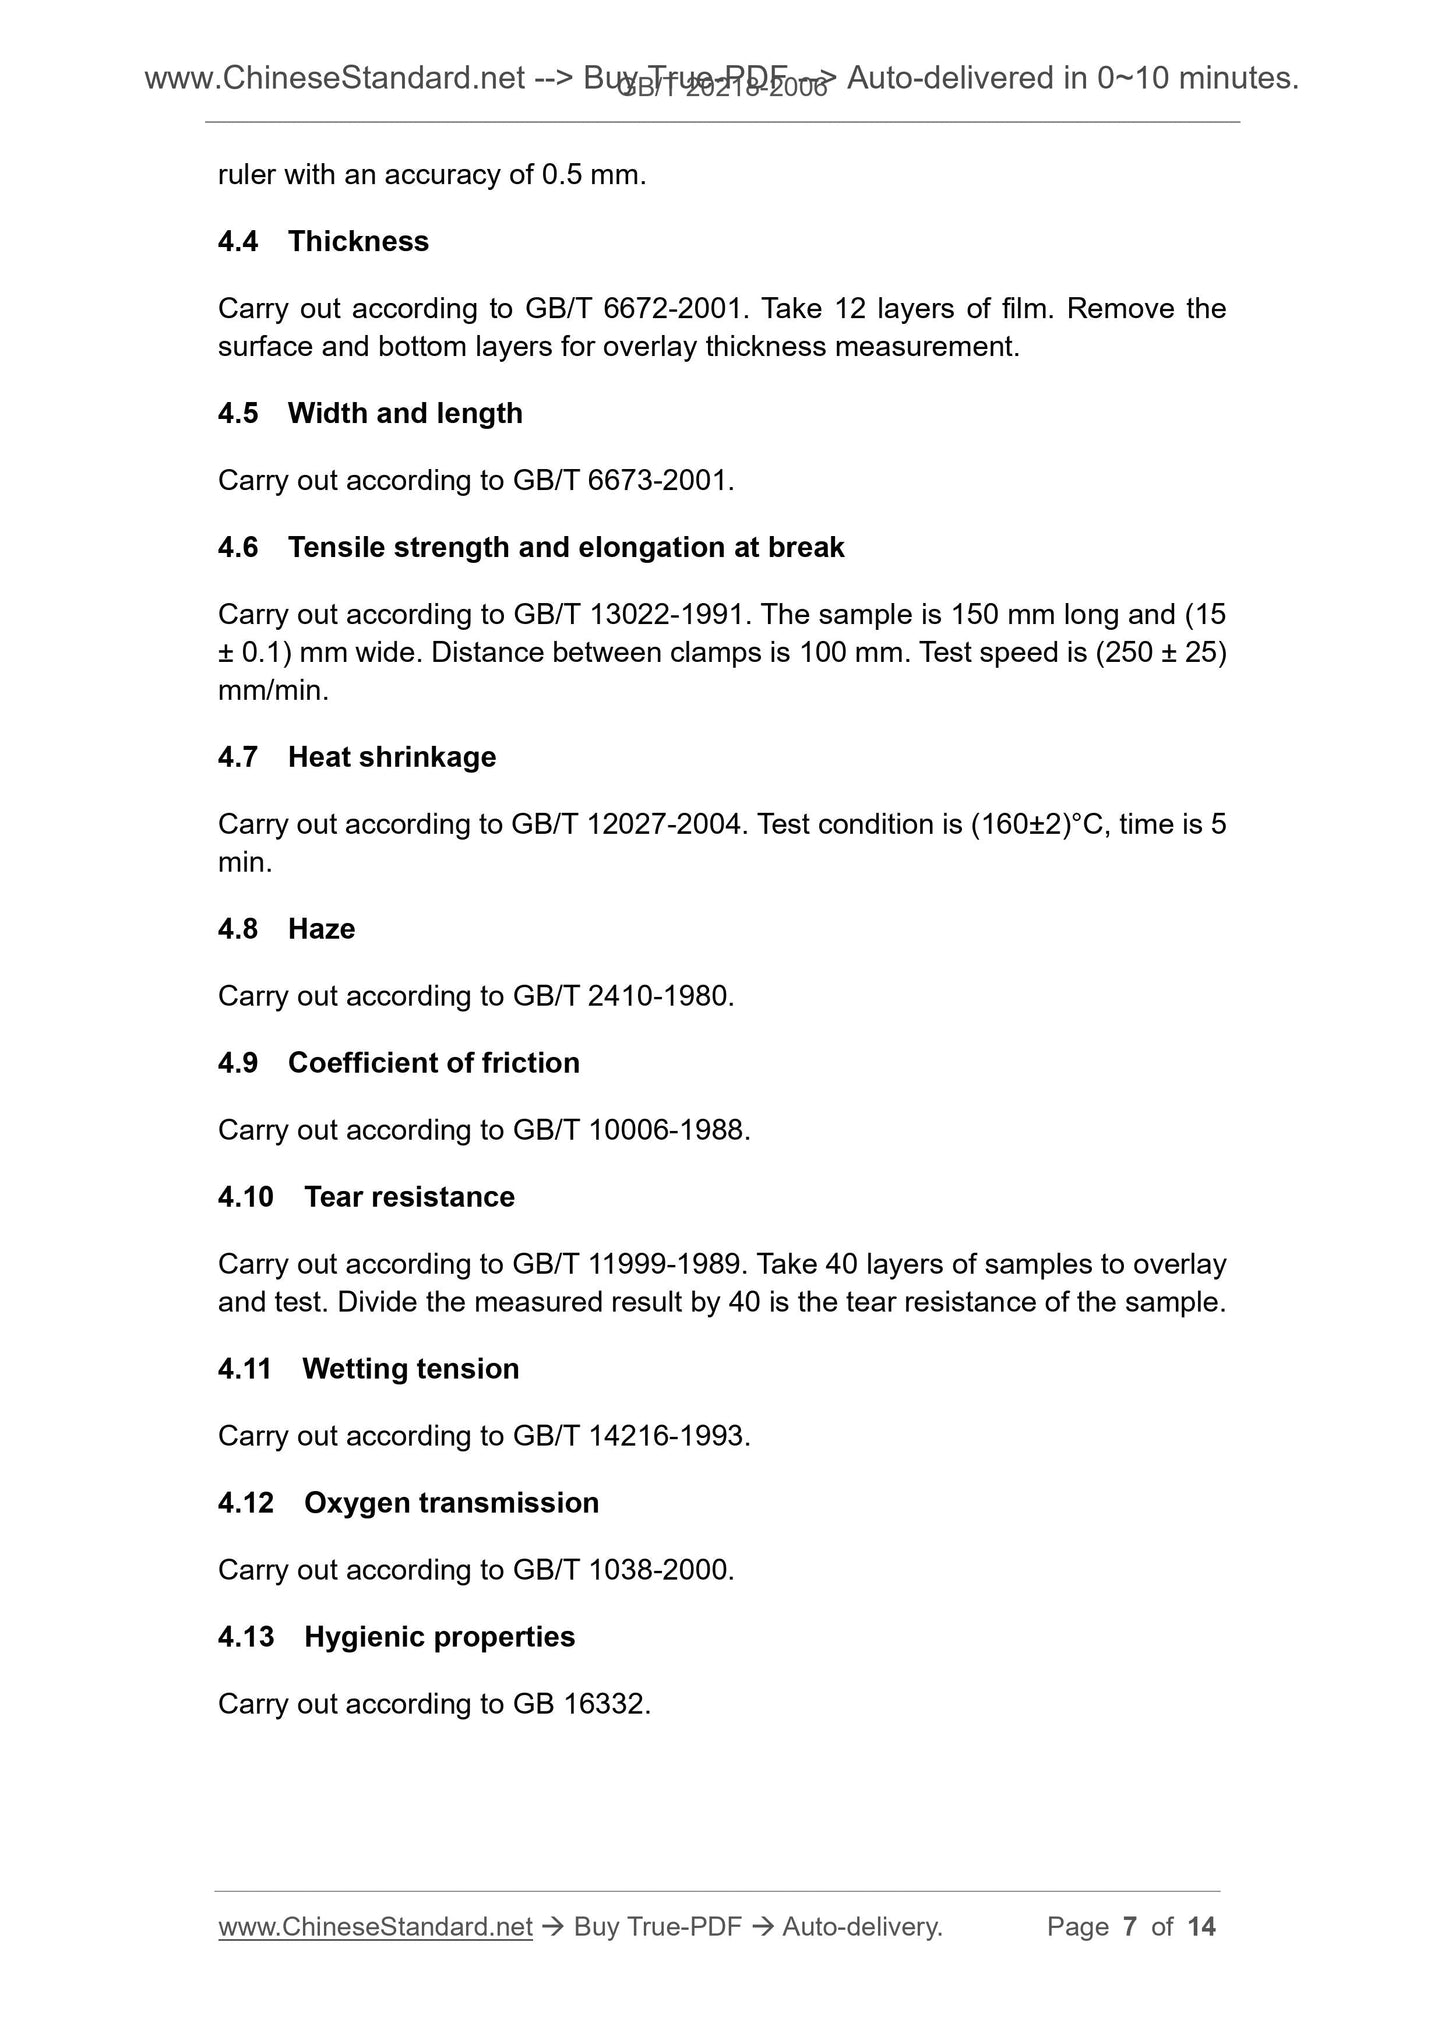 GB/T 20218-2006 Page 4